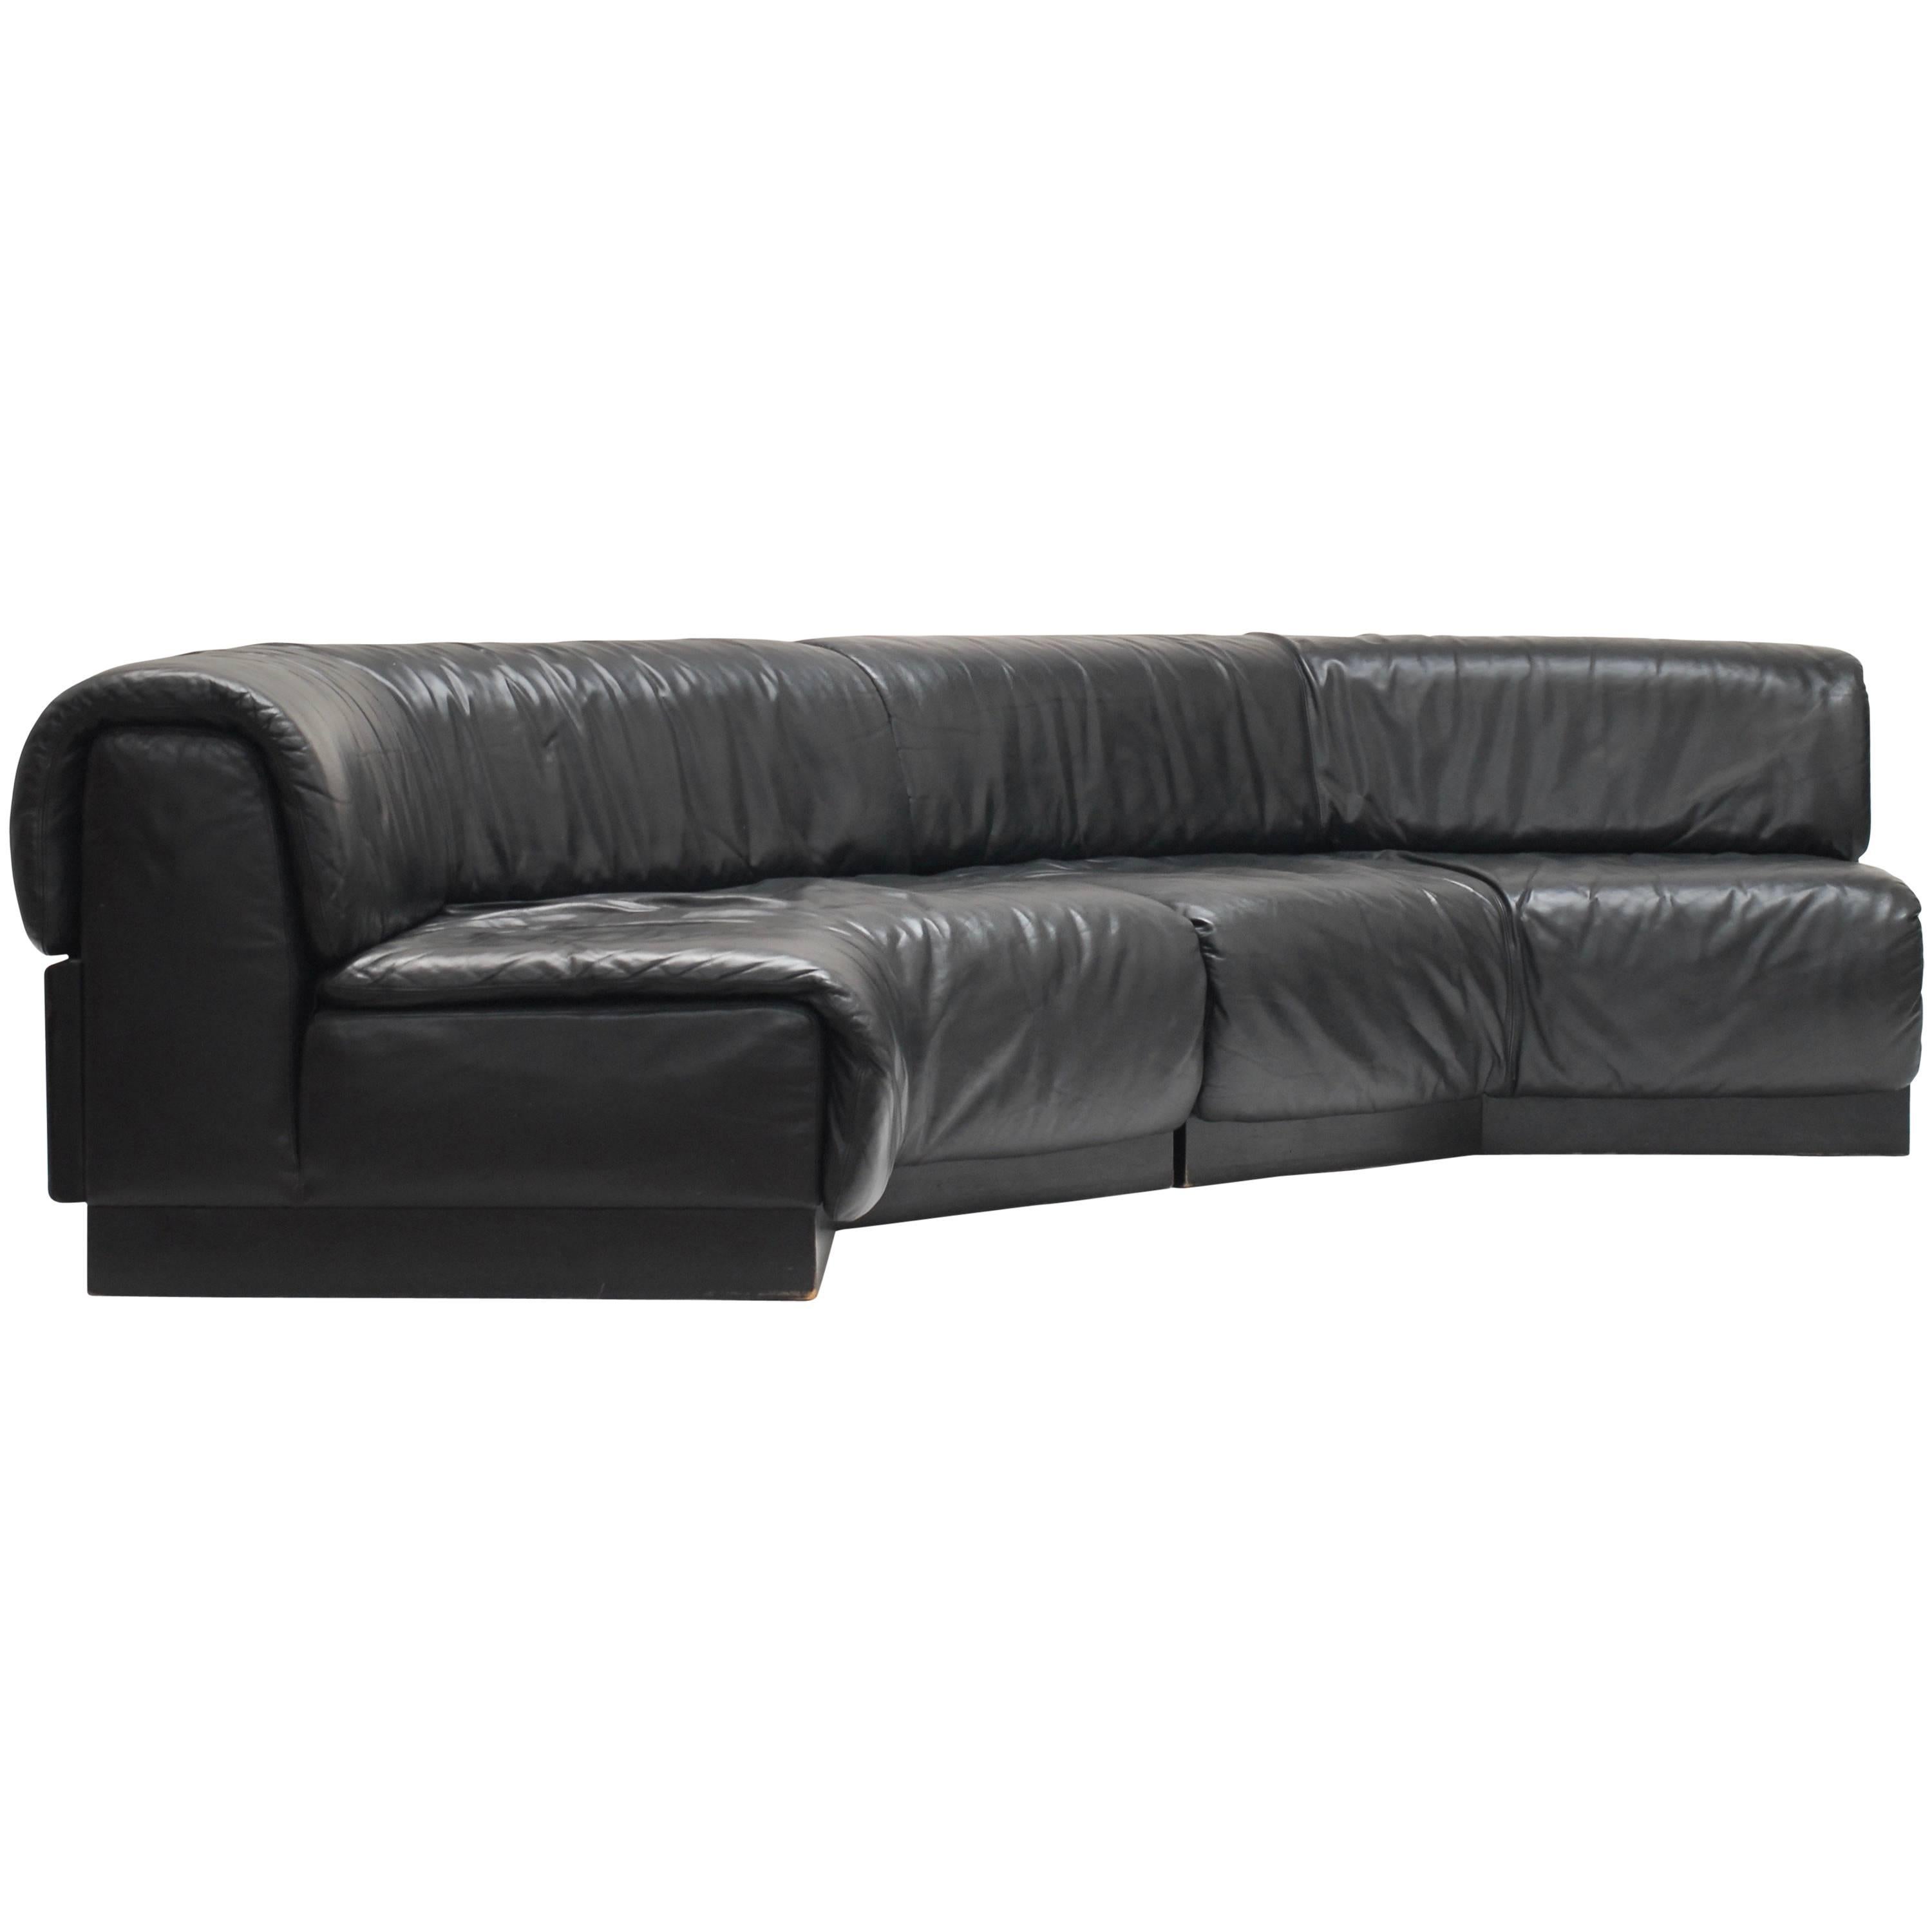 Durlet 1970 Curved Leather Sofa For Sale